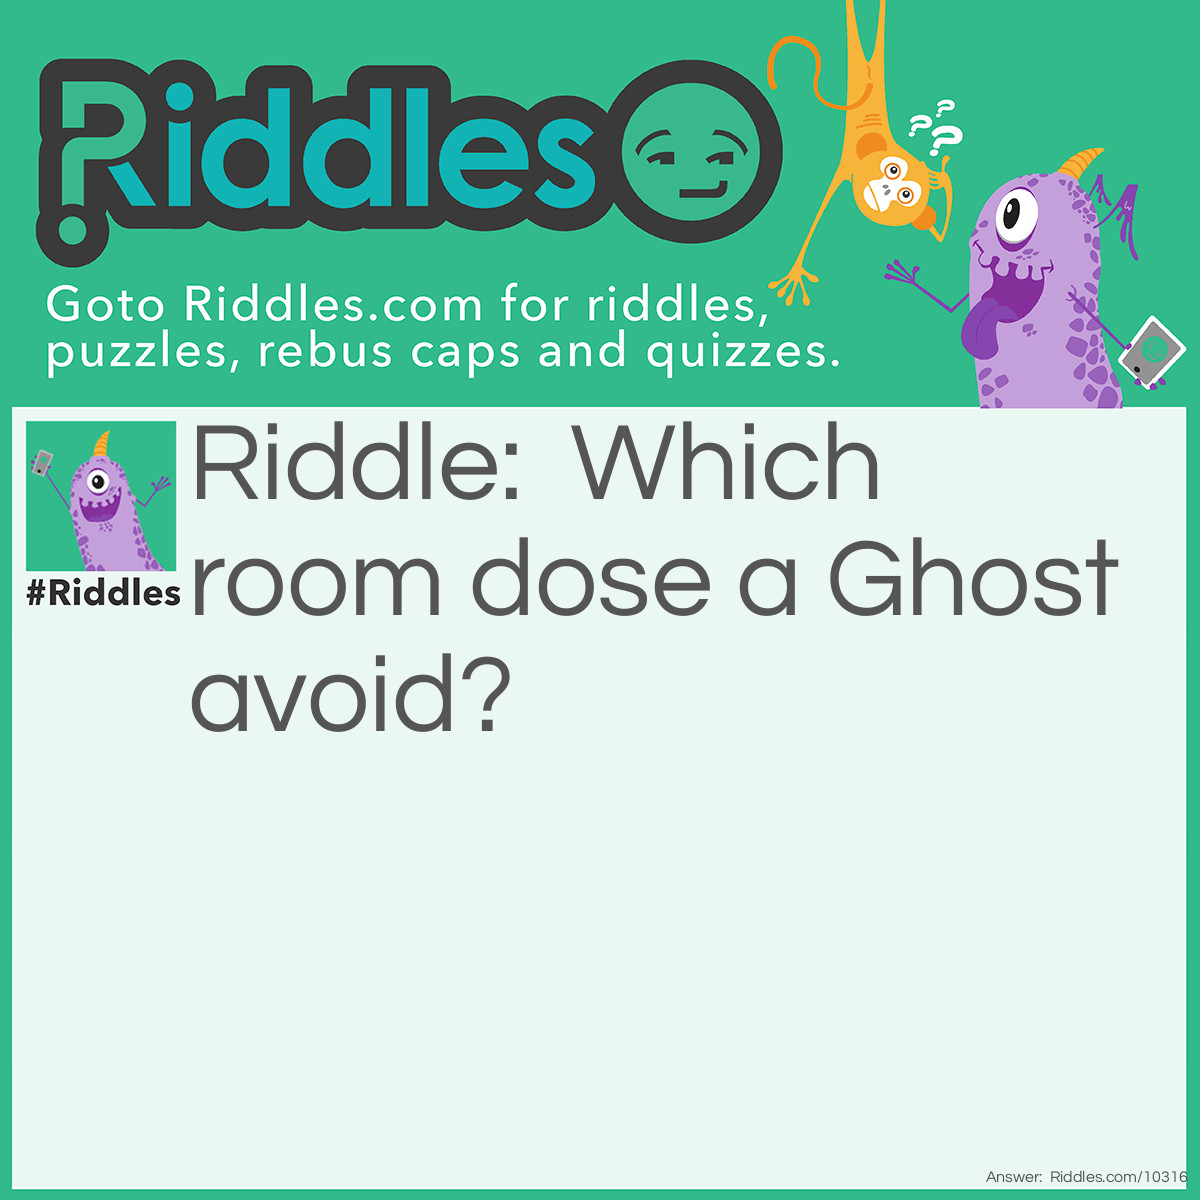 Riddle: Which room dose a Ghost avoid? Answer: The Living room.